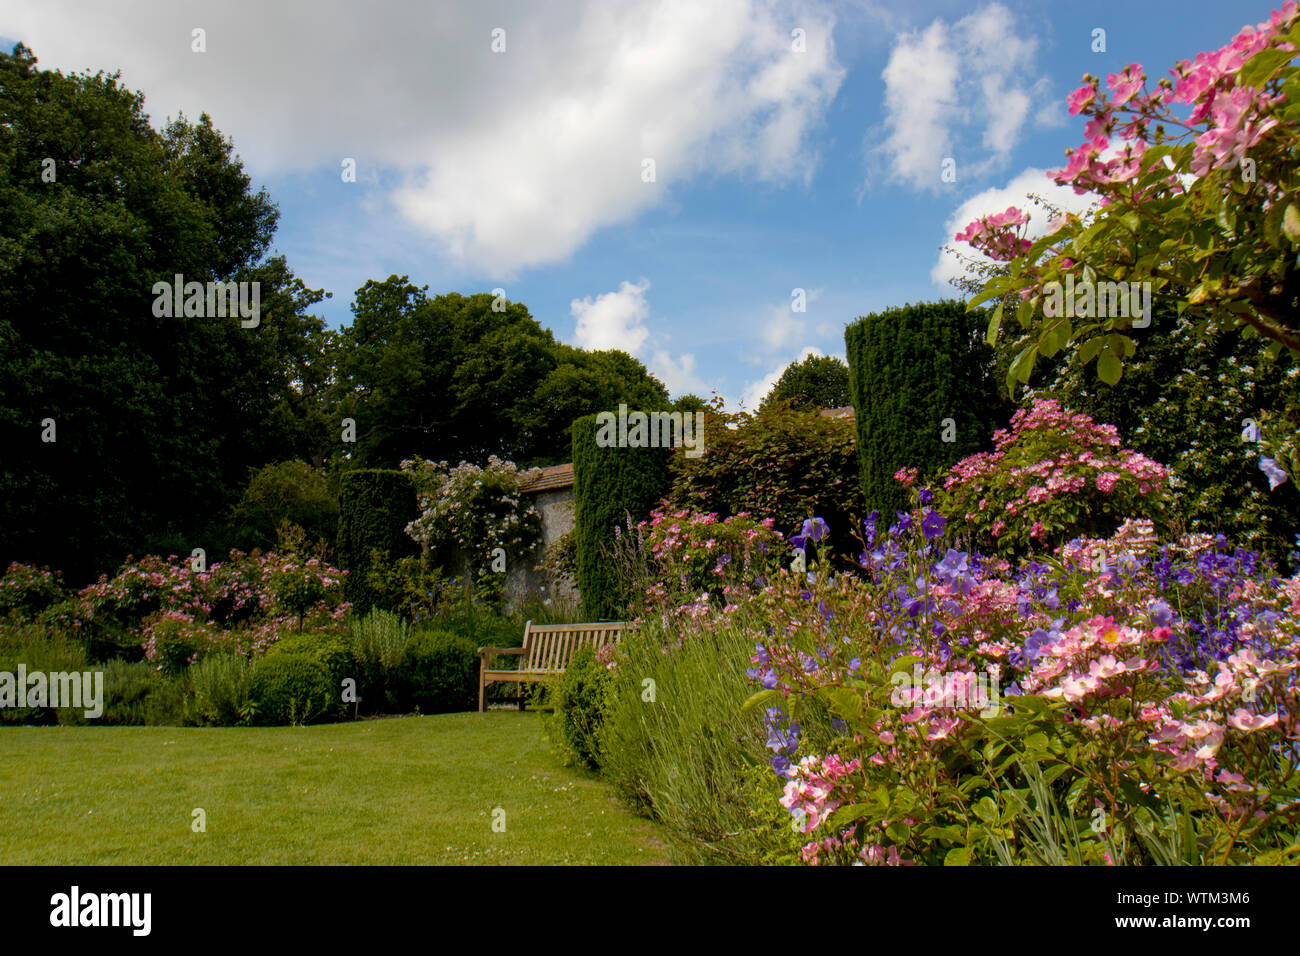 A beautiful formal garden in Normandy, France Stock Photo